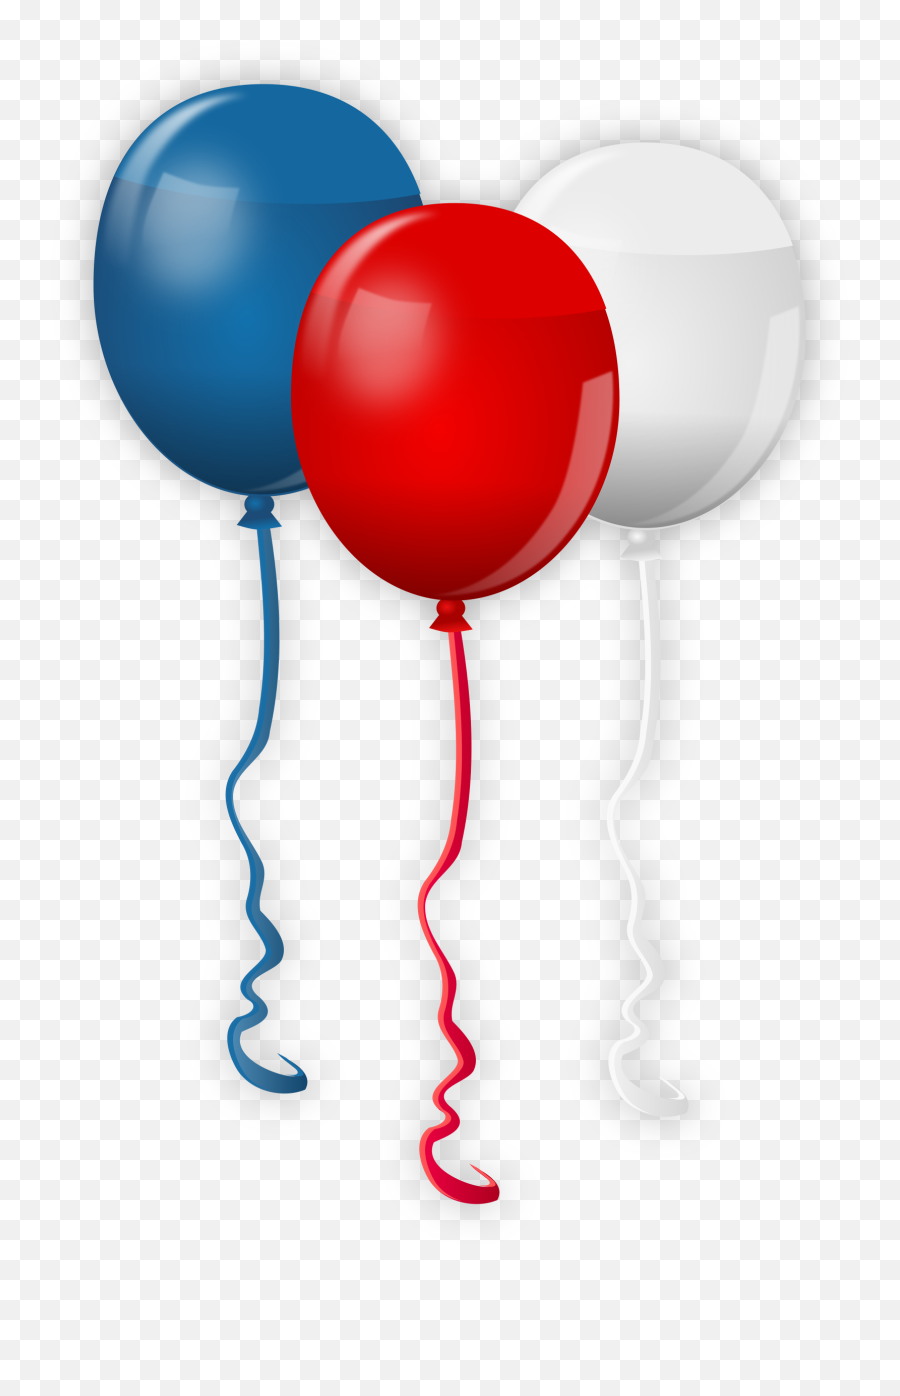 Free 4th Of July Clipart - Independence Day Graphics Balloon In White Red Blue Emoji,Balloons Clipart